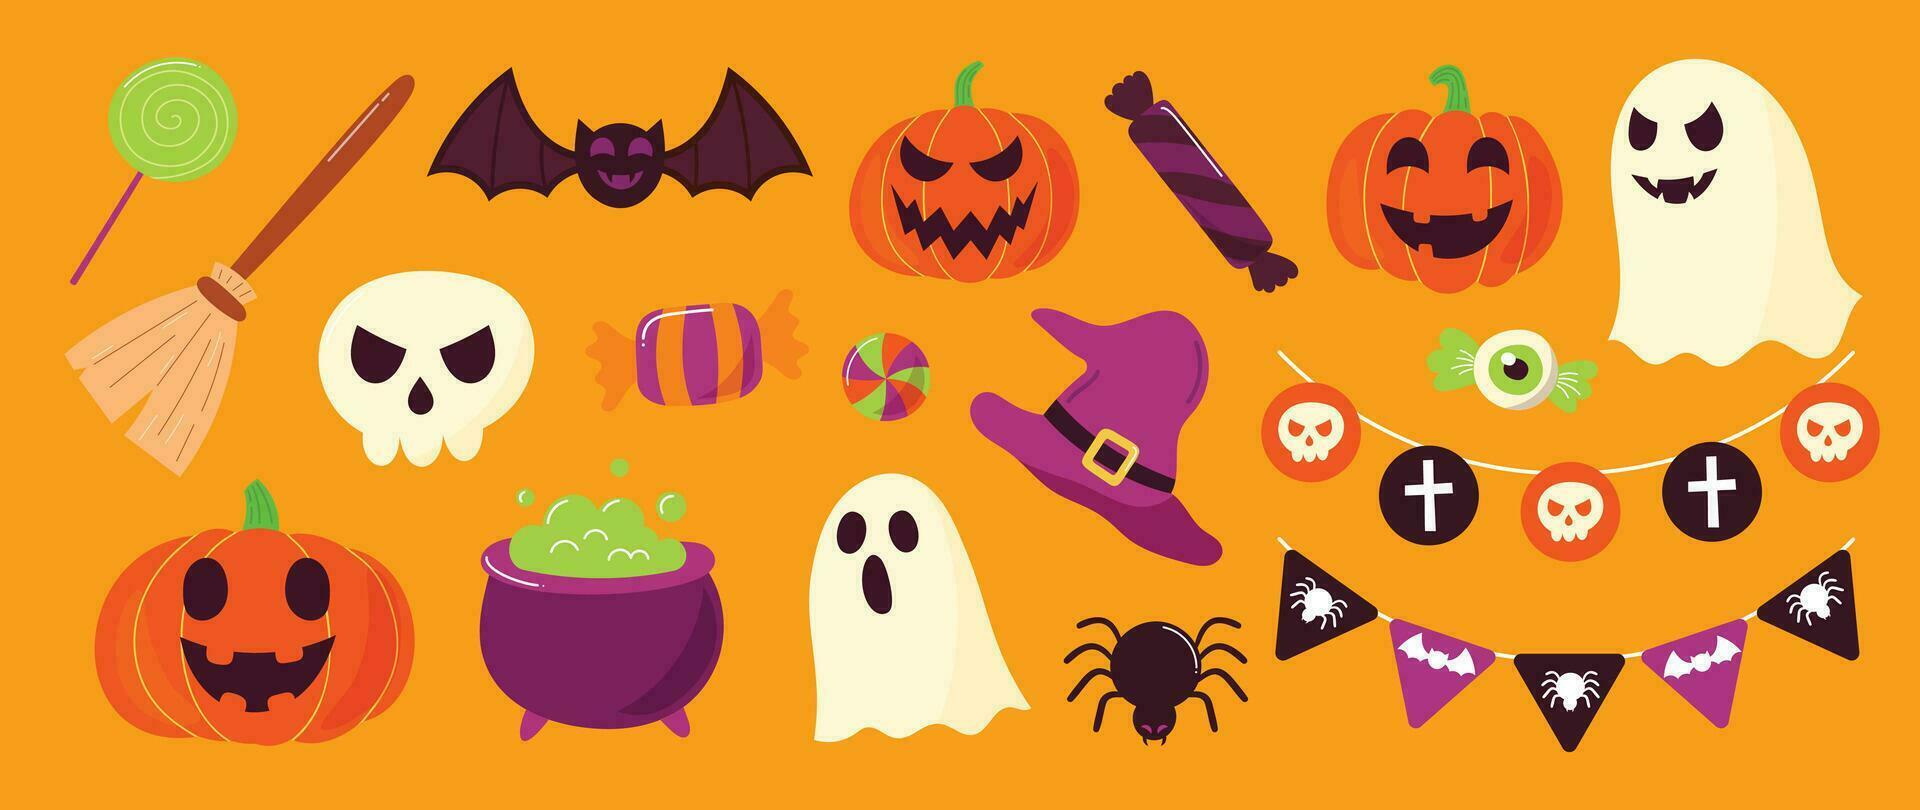 Happy Halloween day element background vector. Cute collection of spooky ghost, pumpkin, bat, lollipop, spider, cauldron, swab, skull. Adorable halloween festival elements for decoration, prints. vector